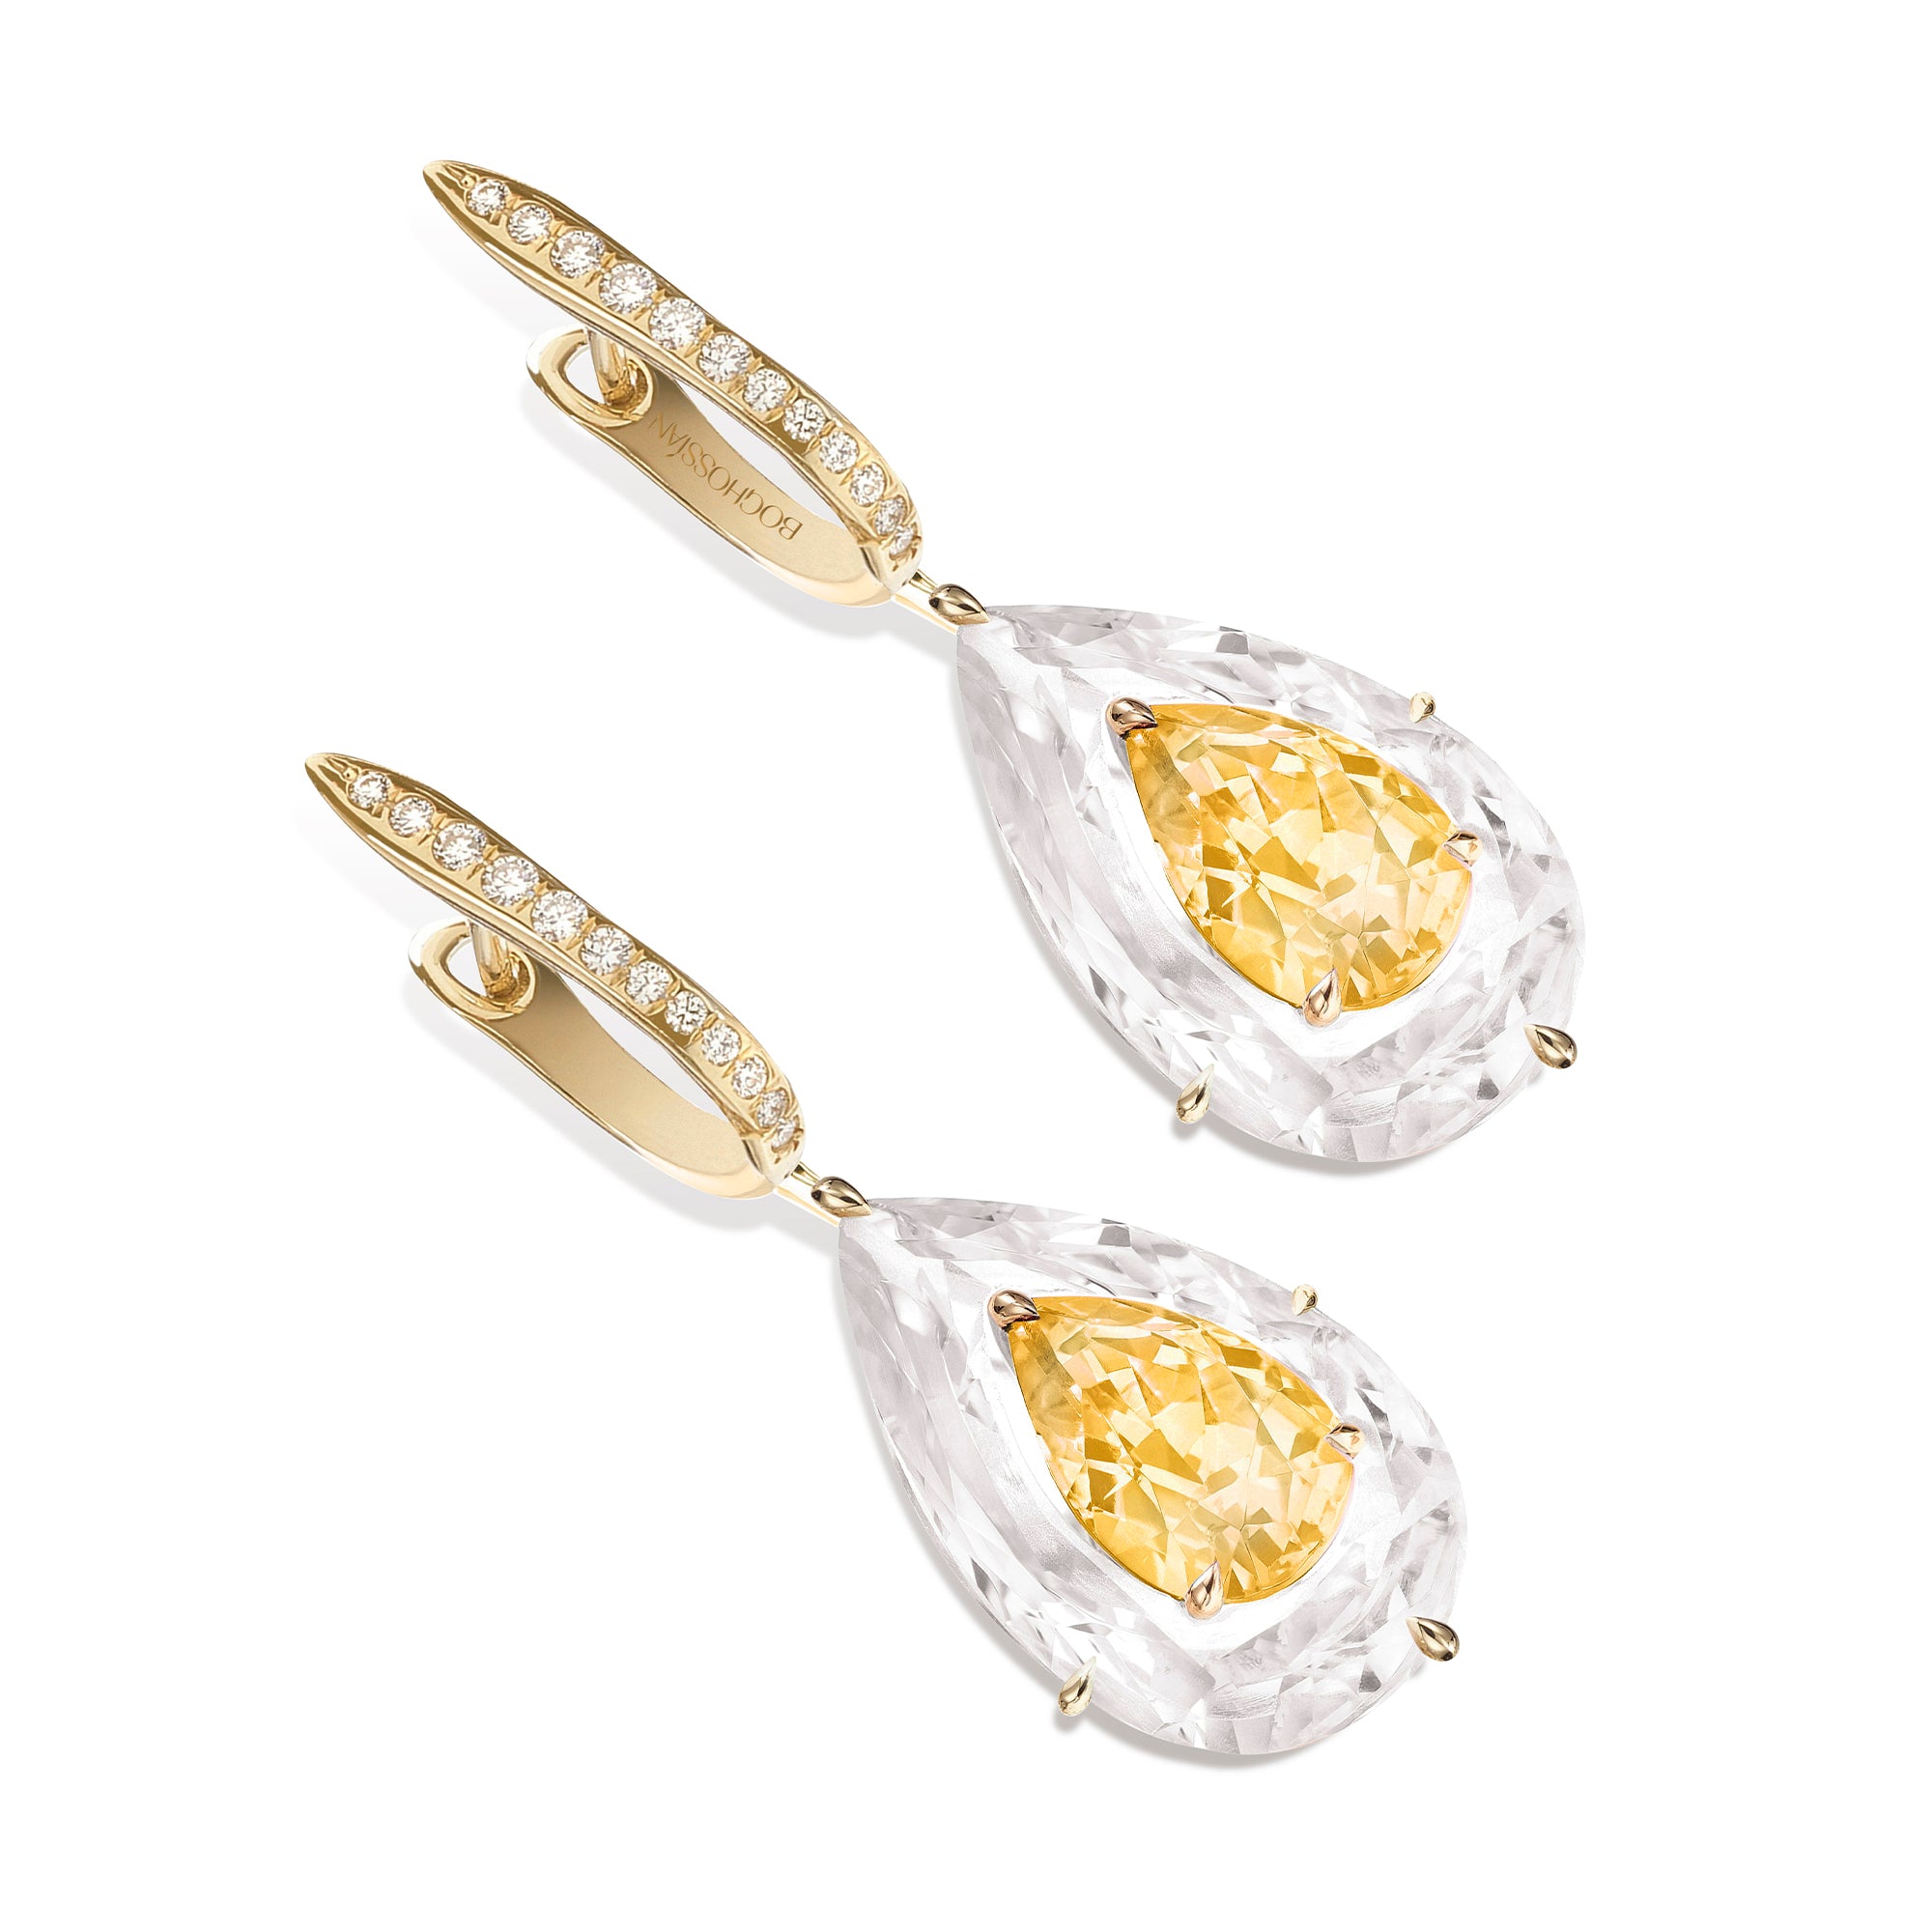 Shine - Citrine and Rock Crystal Earrings